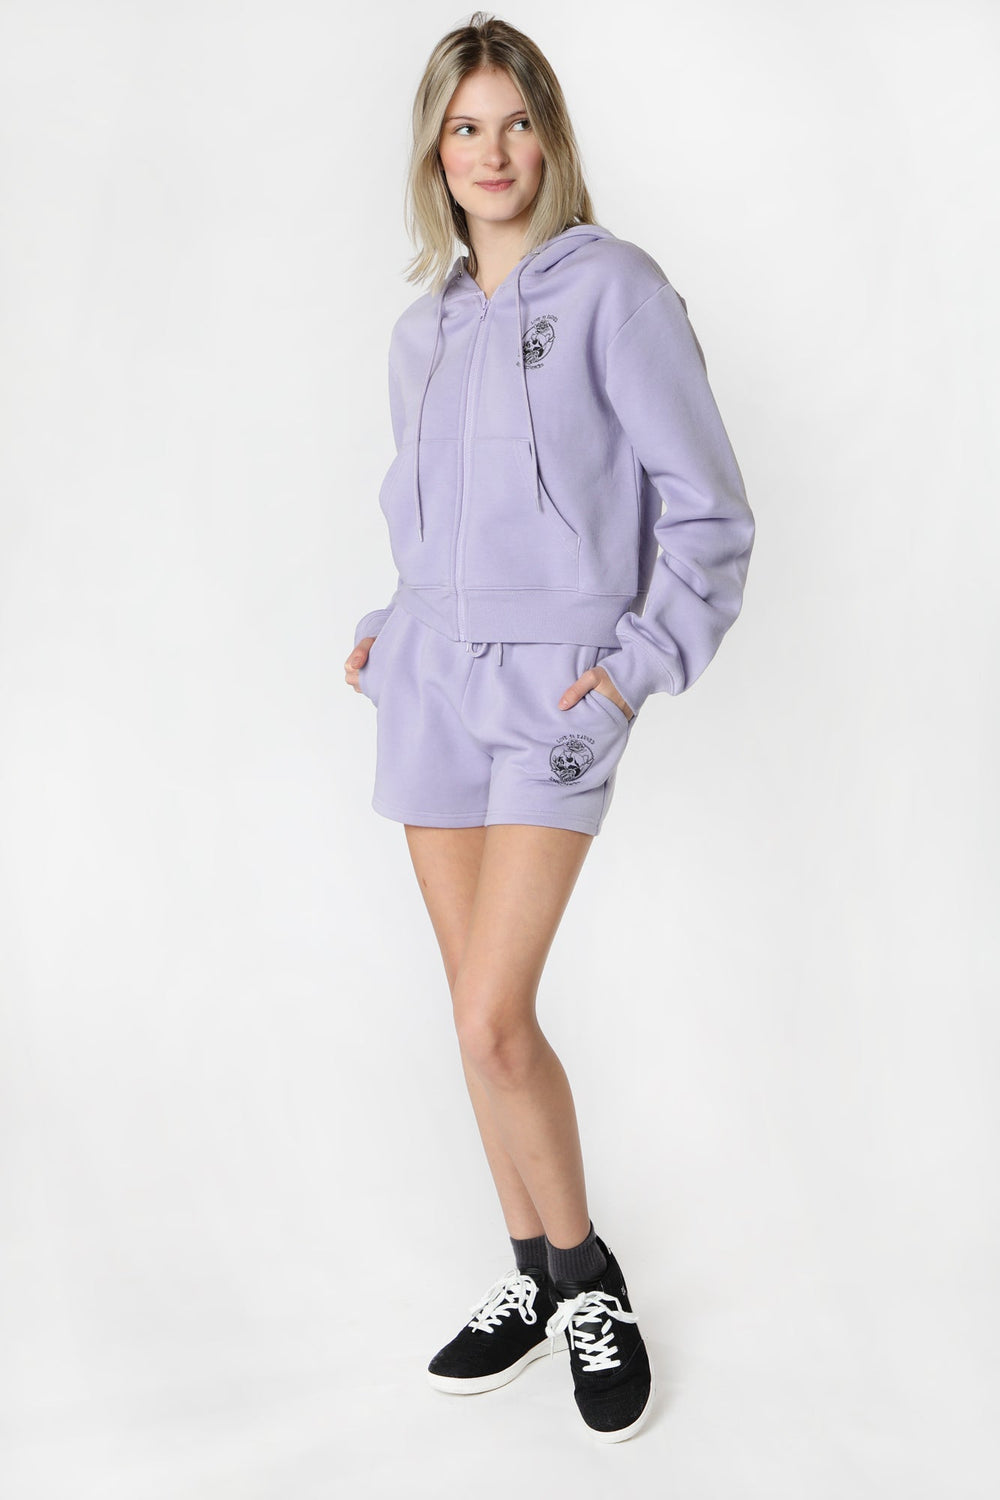 Womens Sovrn Voices Lilac Basic Fleece Shorts Womens Sovrn Voices Lilac Basic Fleece Shorts